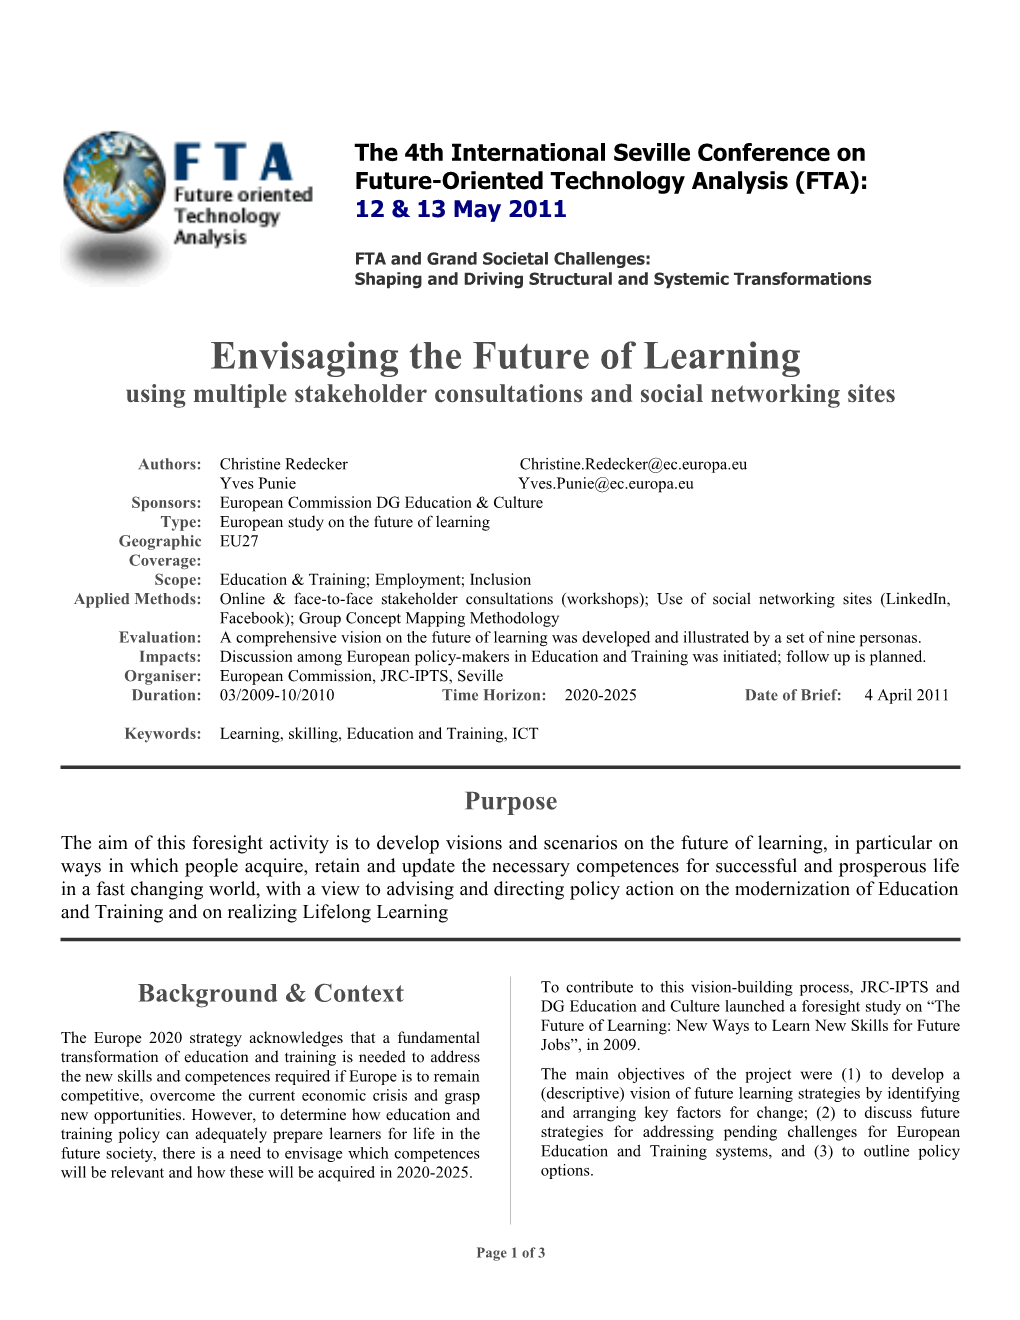 Envisaging the Future of Learning